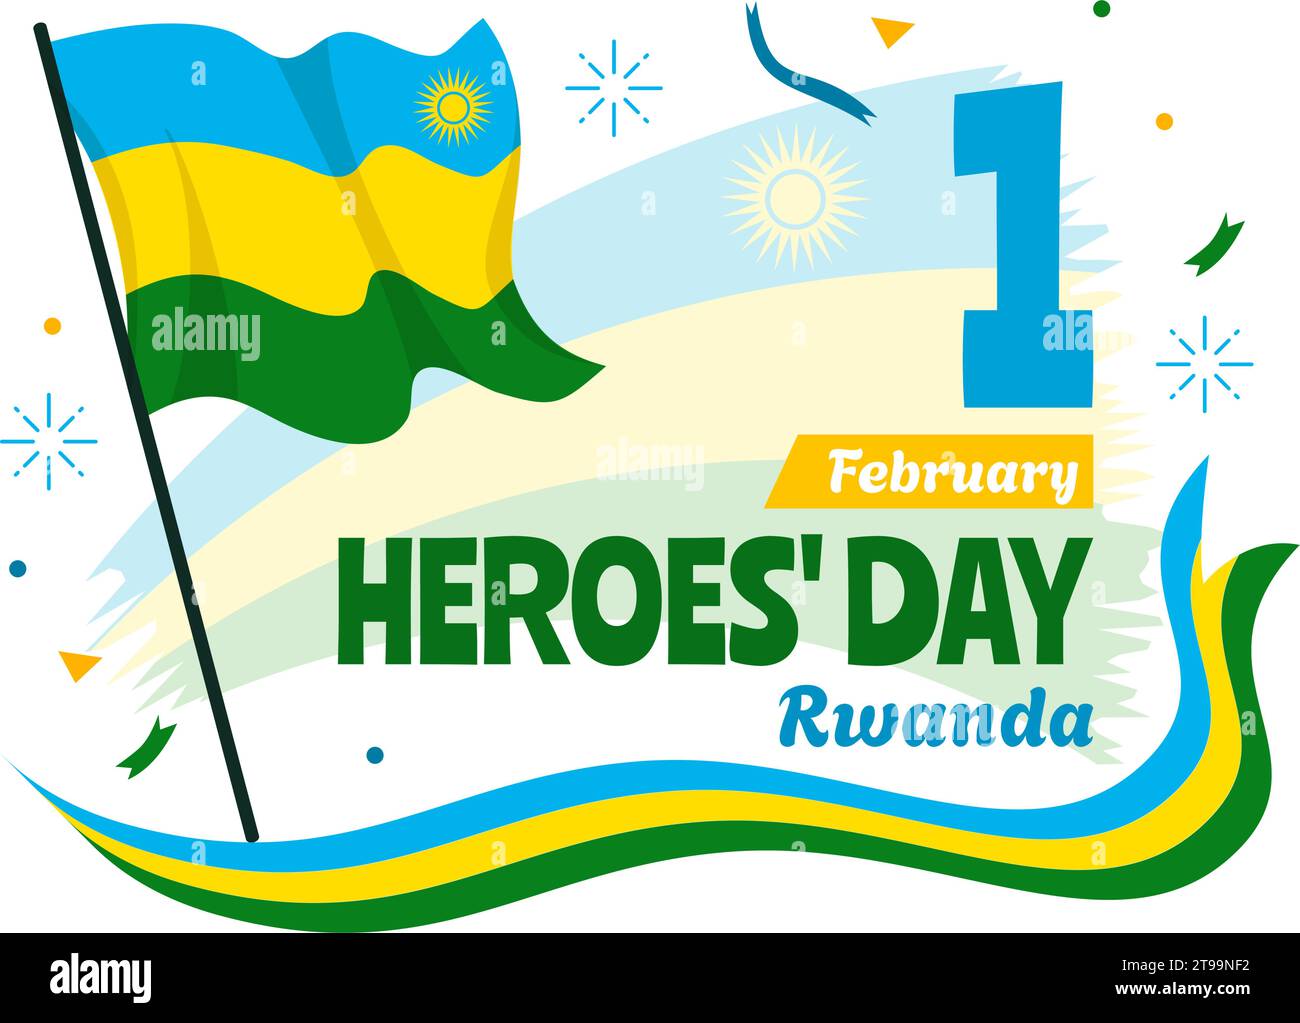 Rwanda Heroes Day Vector Illustration on February 1 with Rwandan Flag and Soldier Memorial who Struggled in National Holiday Cartoon Background Stock Vector